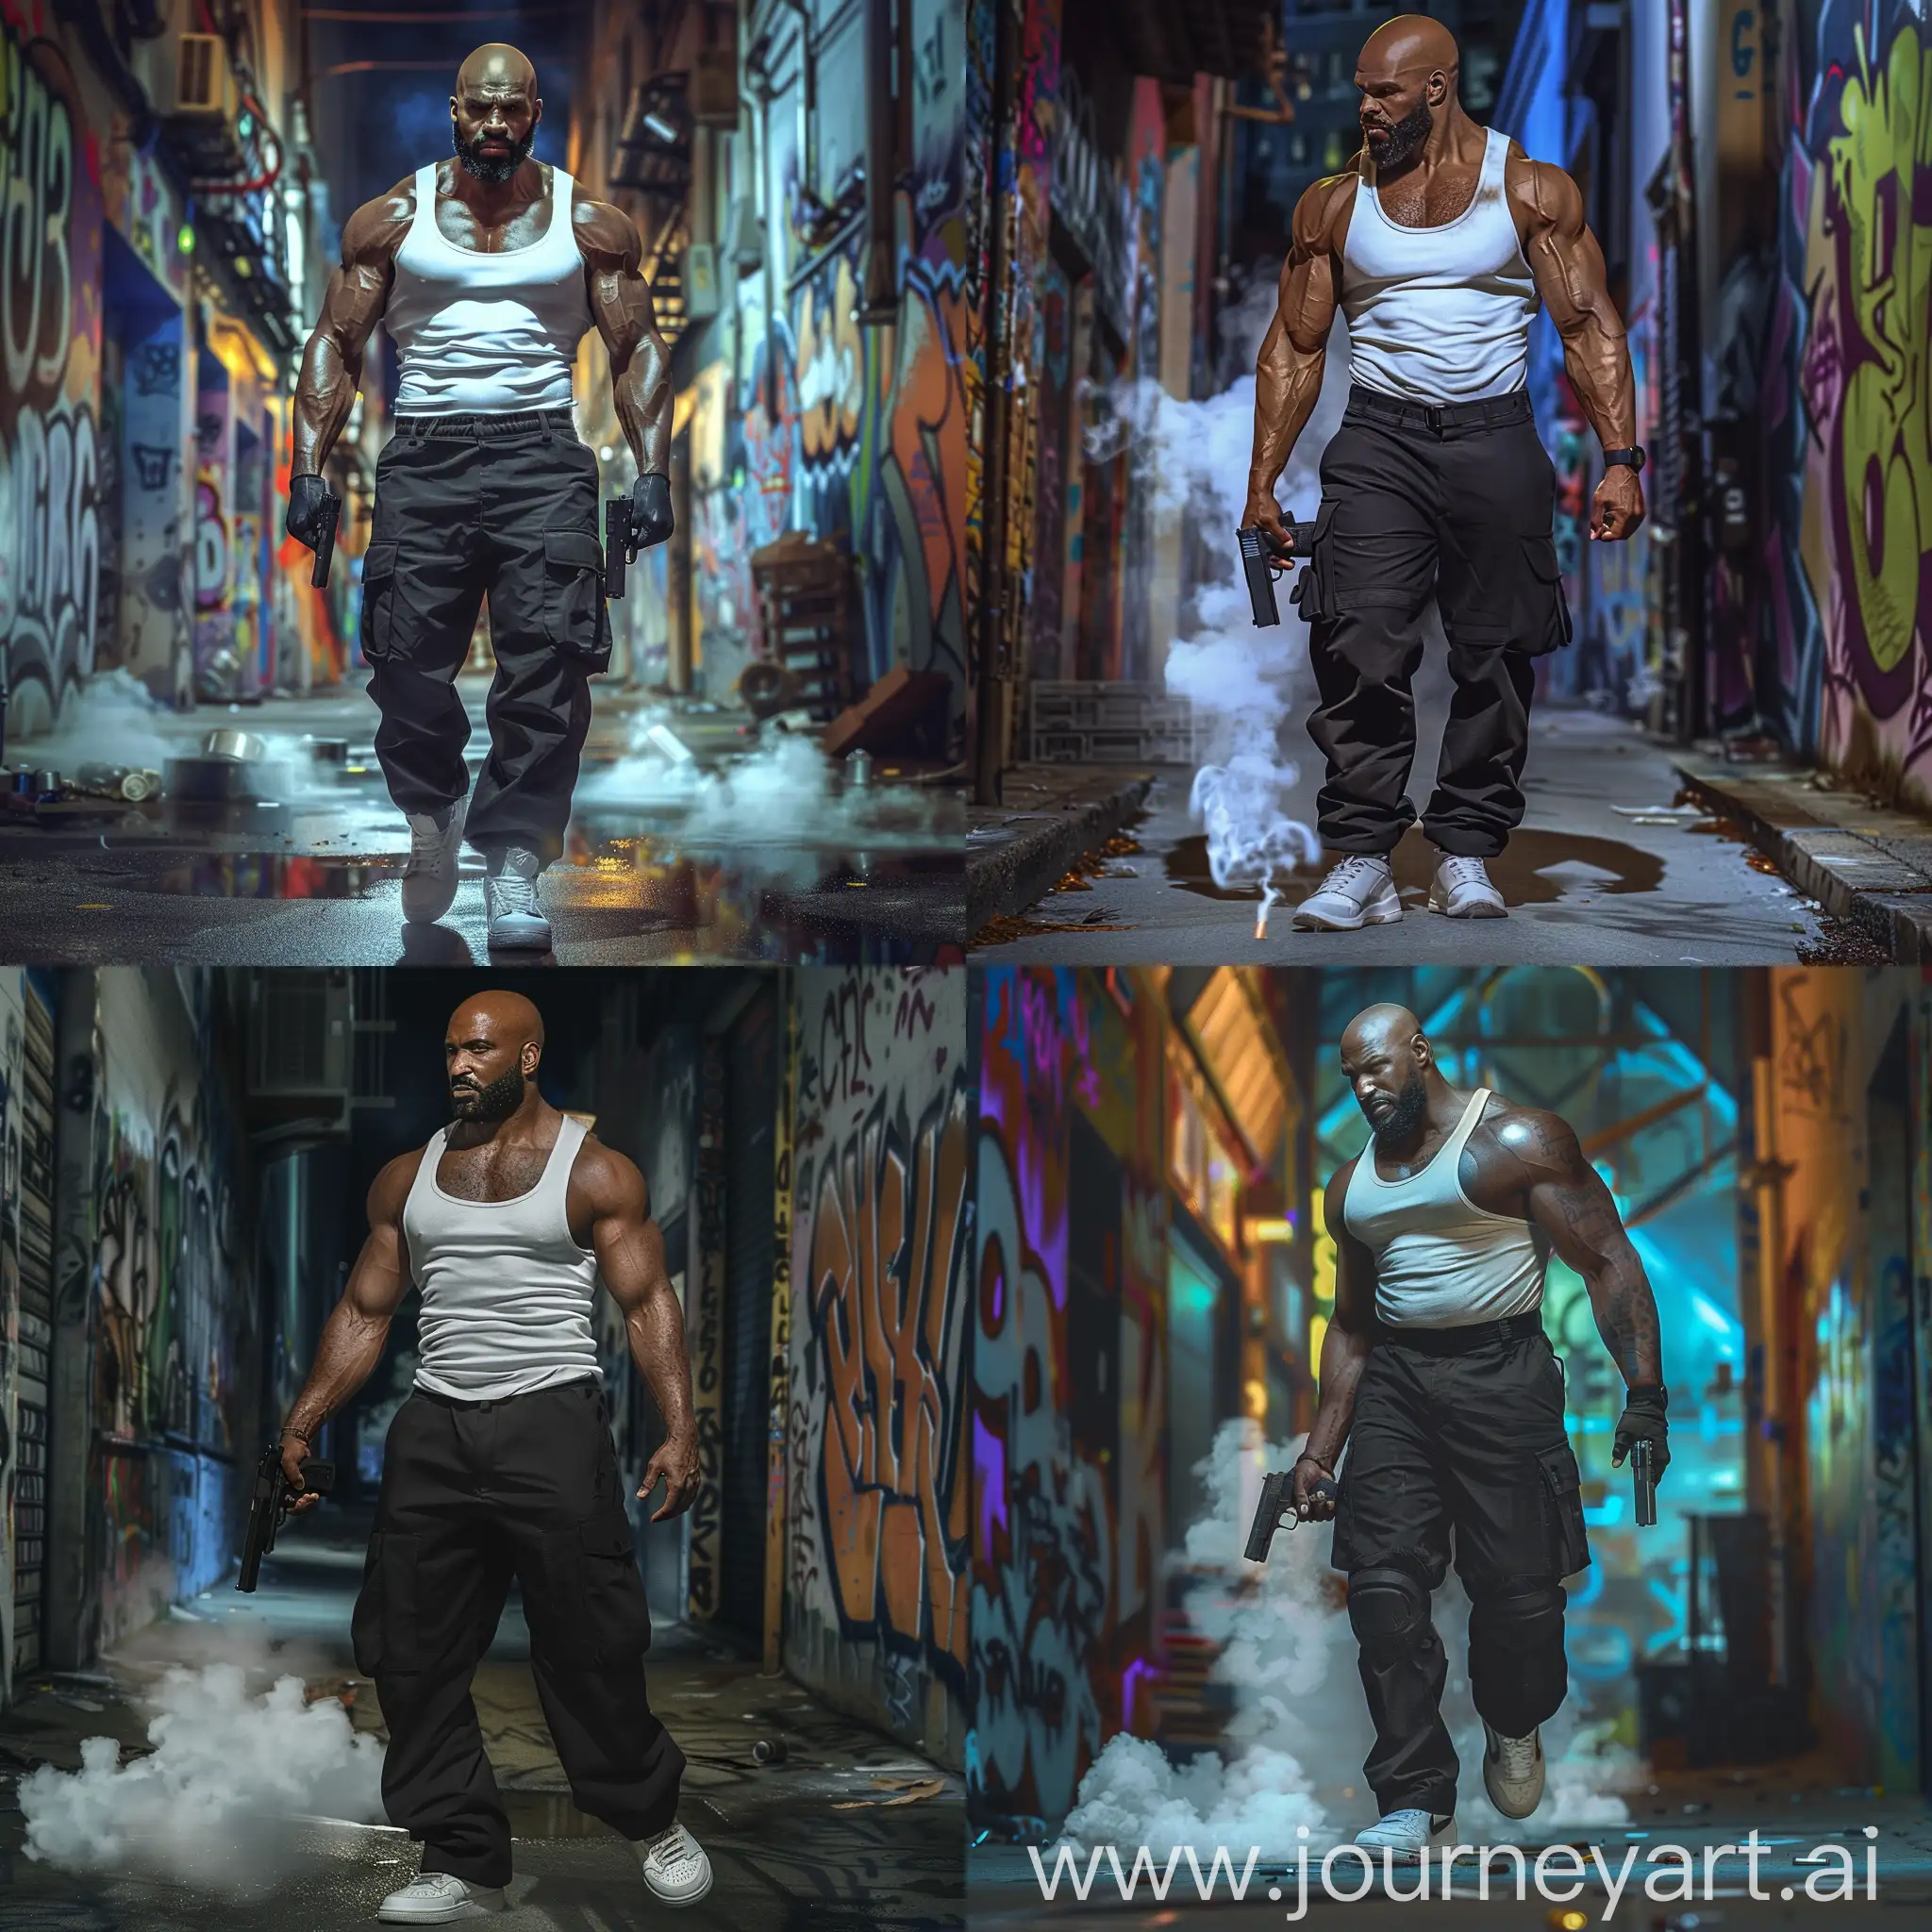 a 4k hdr photo realistic digital  art image of a 6 foot 6 
Tall caramel  brown skinned African-American man with a bald head,full beard . he is wearing black fitted cargo pants,  he has a slimmer body  with a sadistic look on his face ,clean 
white tank top and white and black Jordan 6s. , walking through a graffiti-painted alley at night in a playful mood gun in hand with smoke coming from the pavement